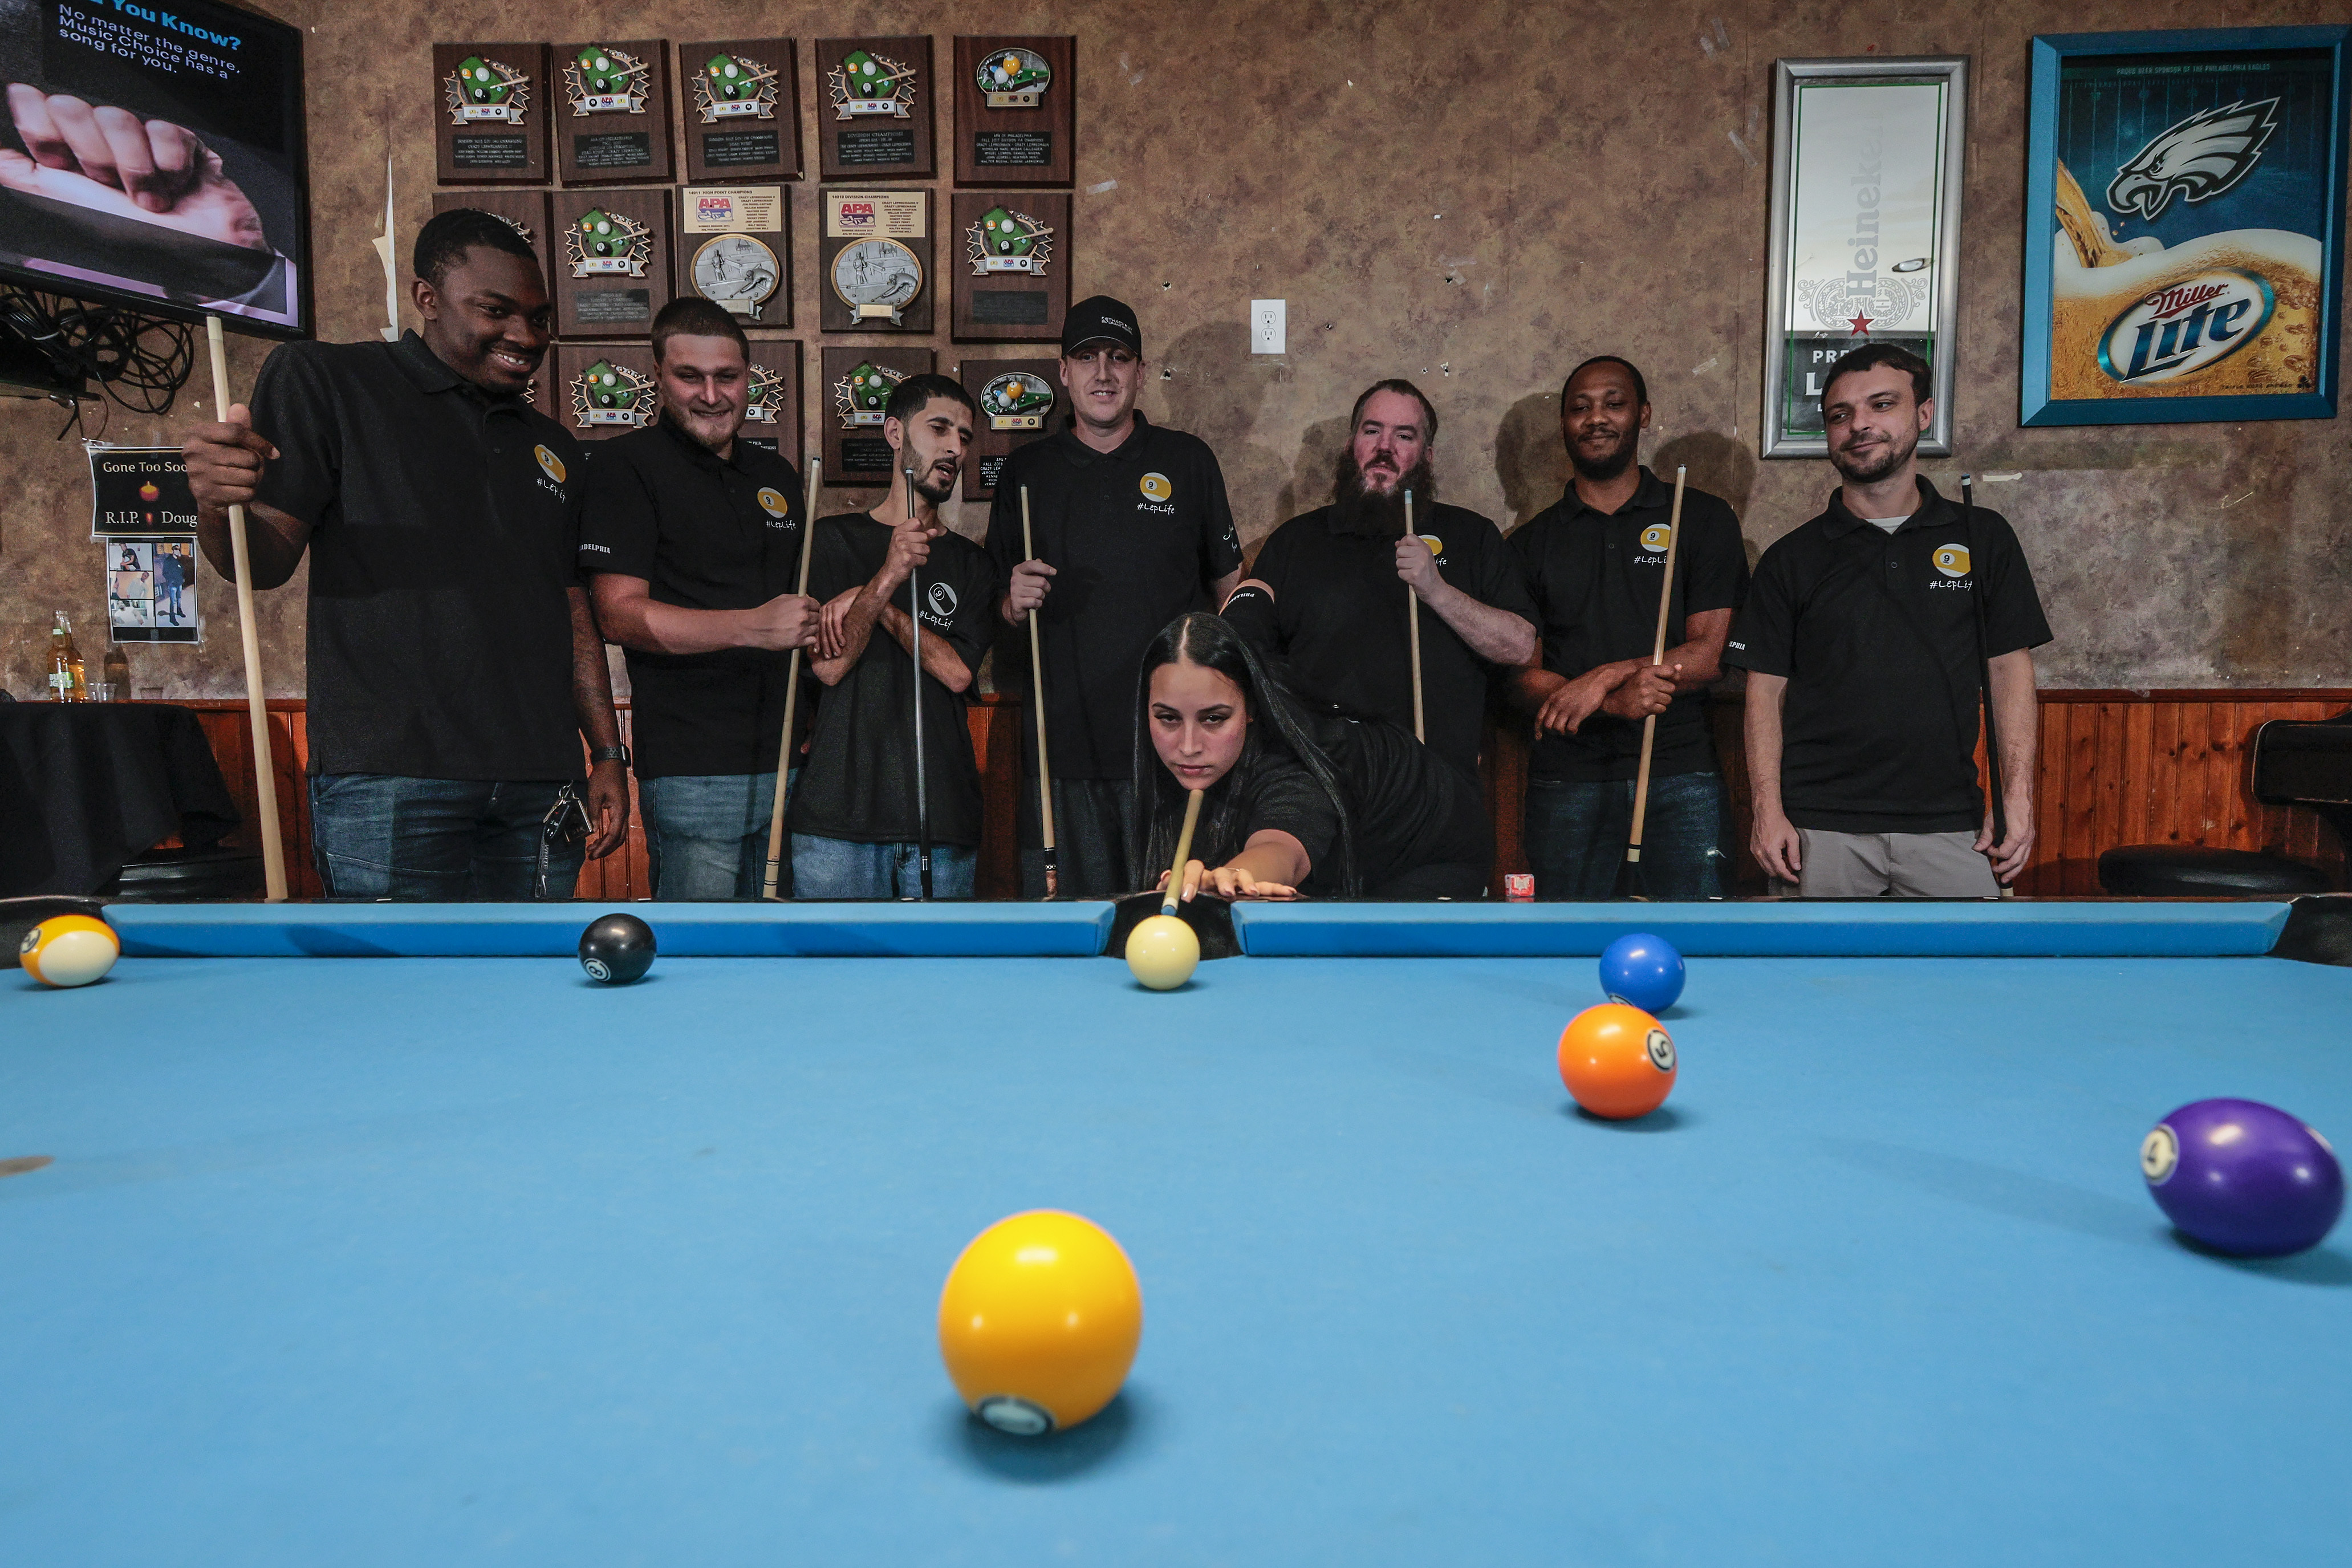 Philly comes in first at the World Pool Championship in Las Vegas image